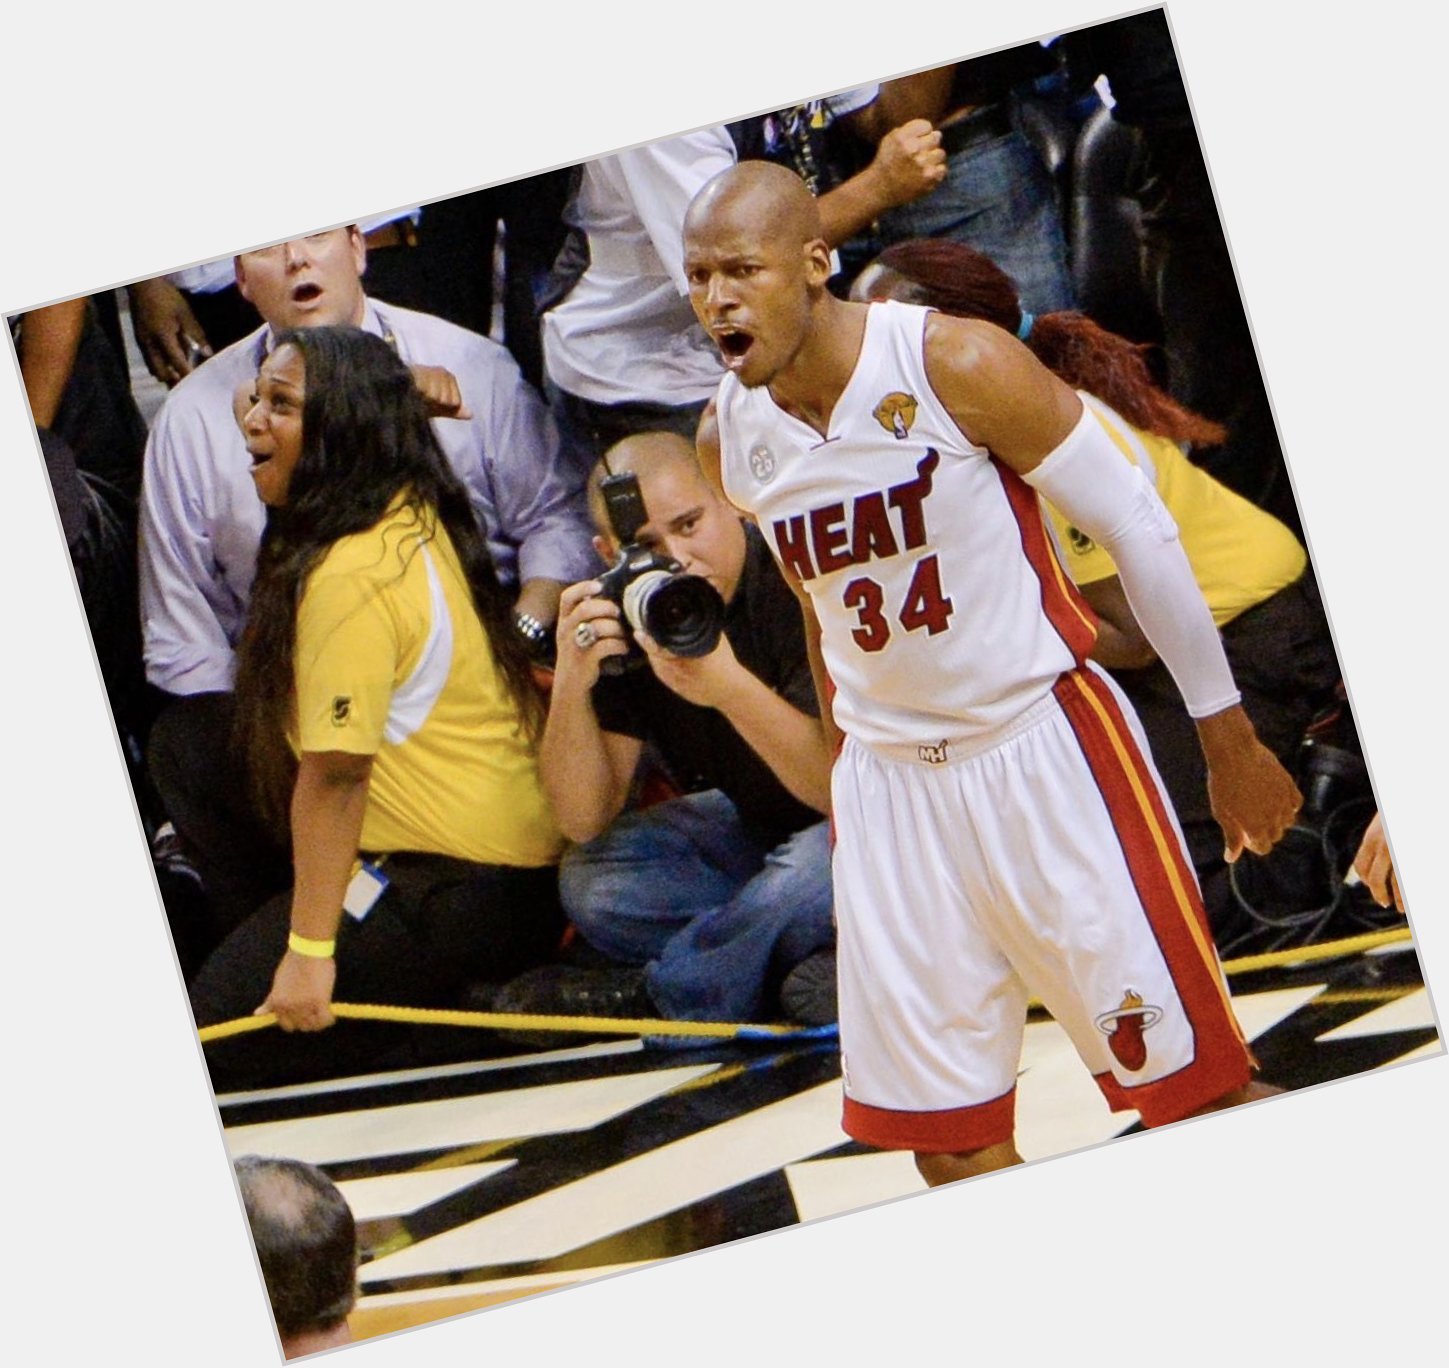 Happy birthday to the GOAT and my role model Ray Allen!!
Don t @ me on the GOAT status 